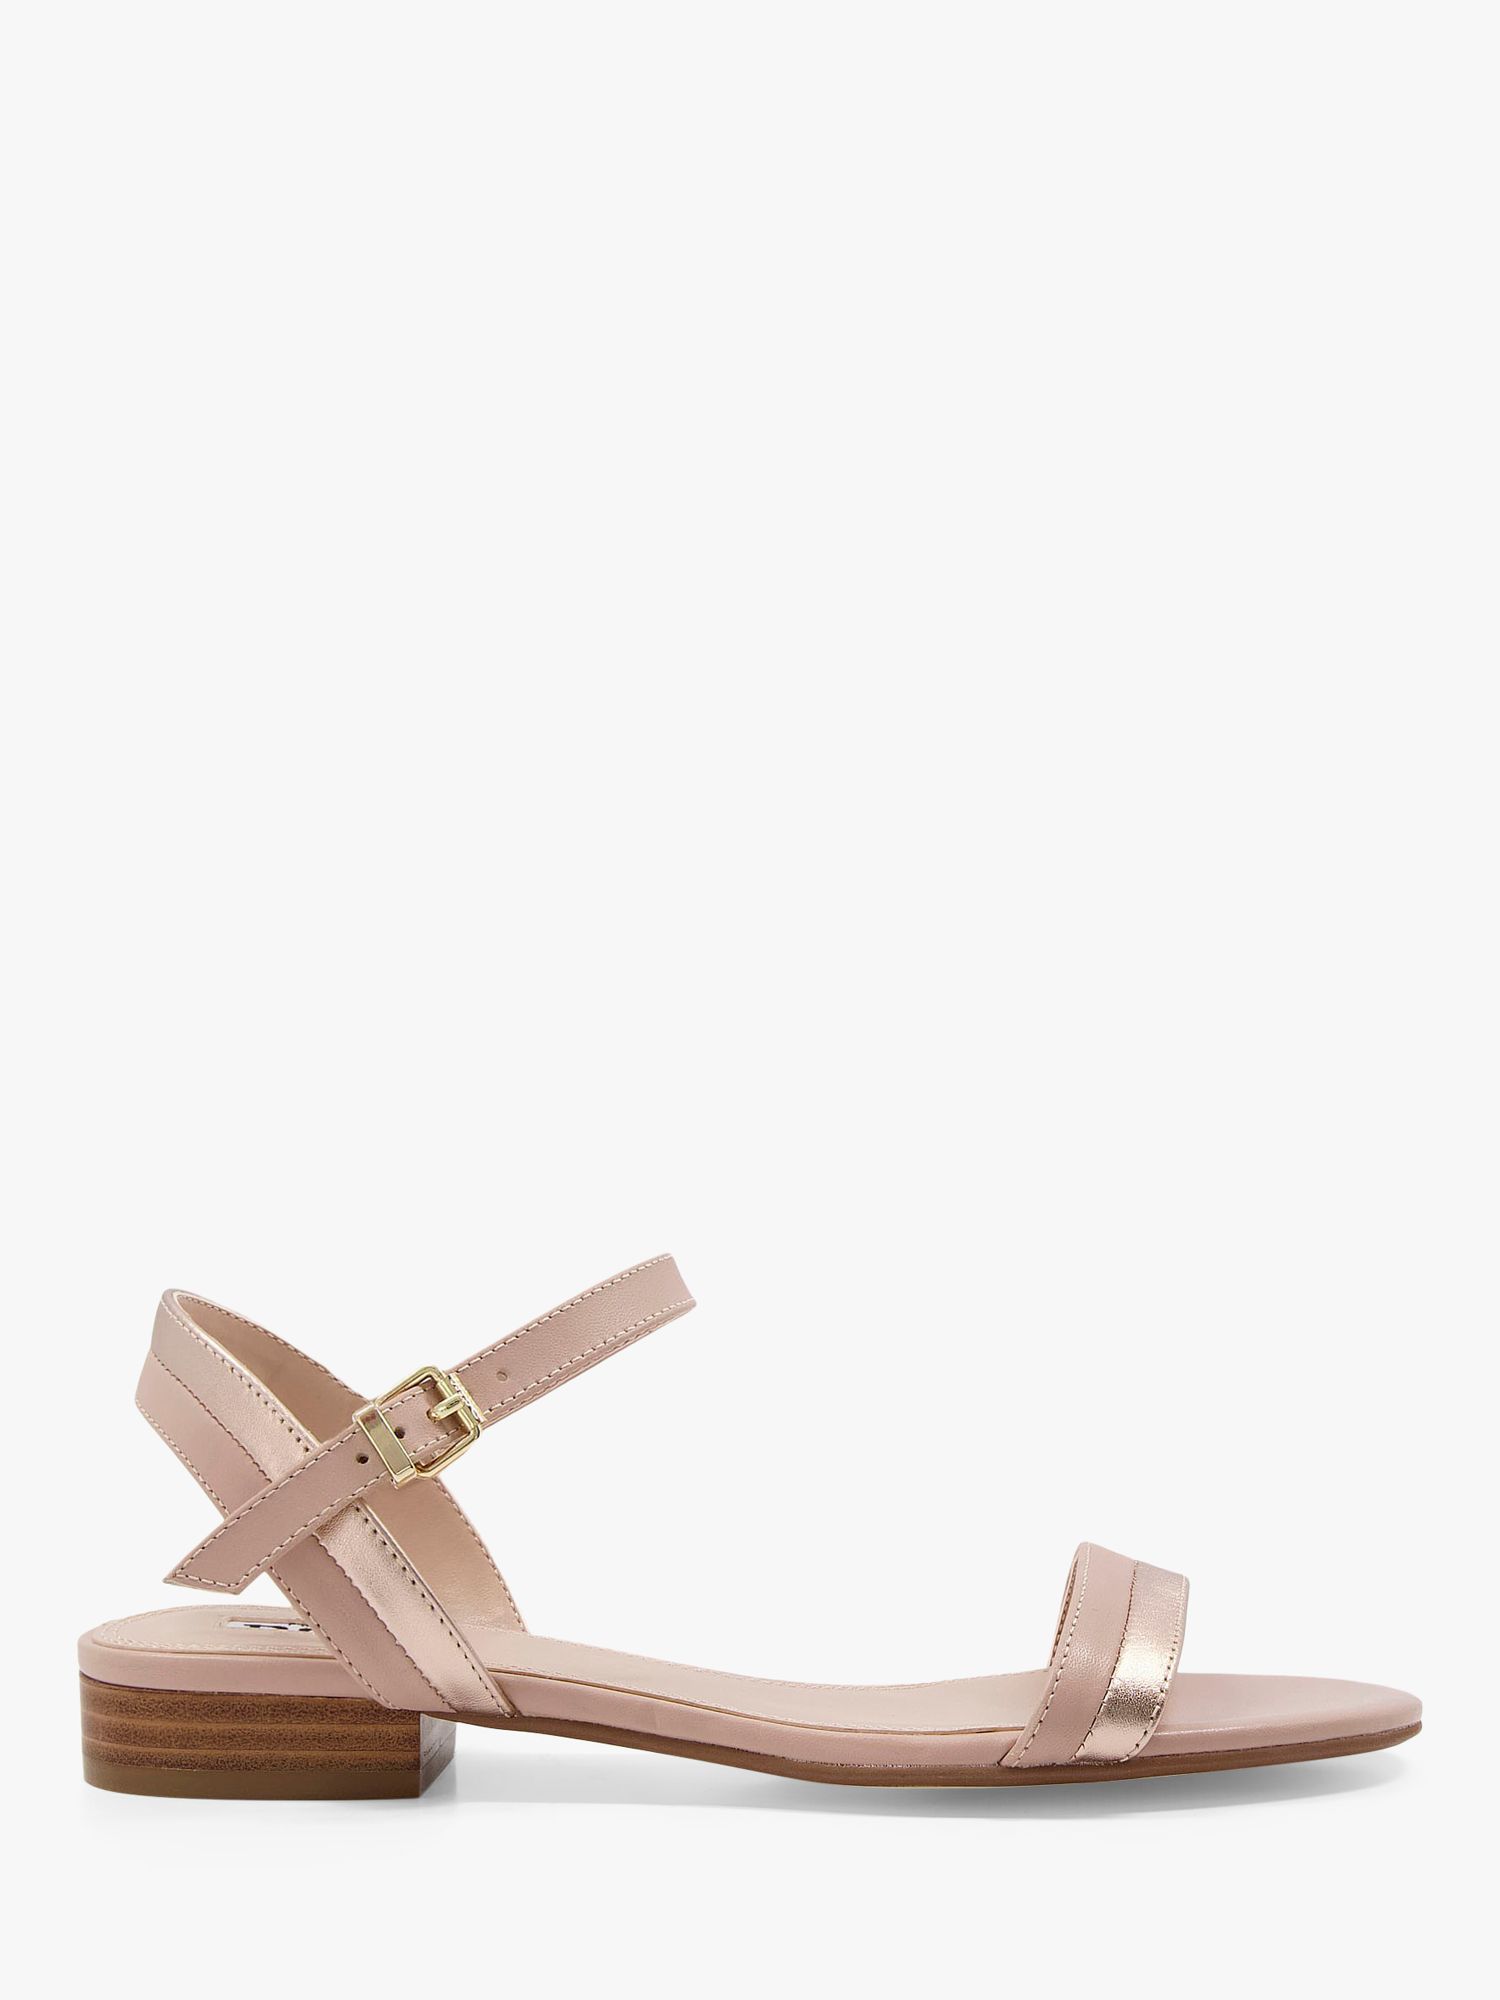 Dune Loyalty Leather Strappy Sandals, Blush at John Lewis & Partners